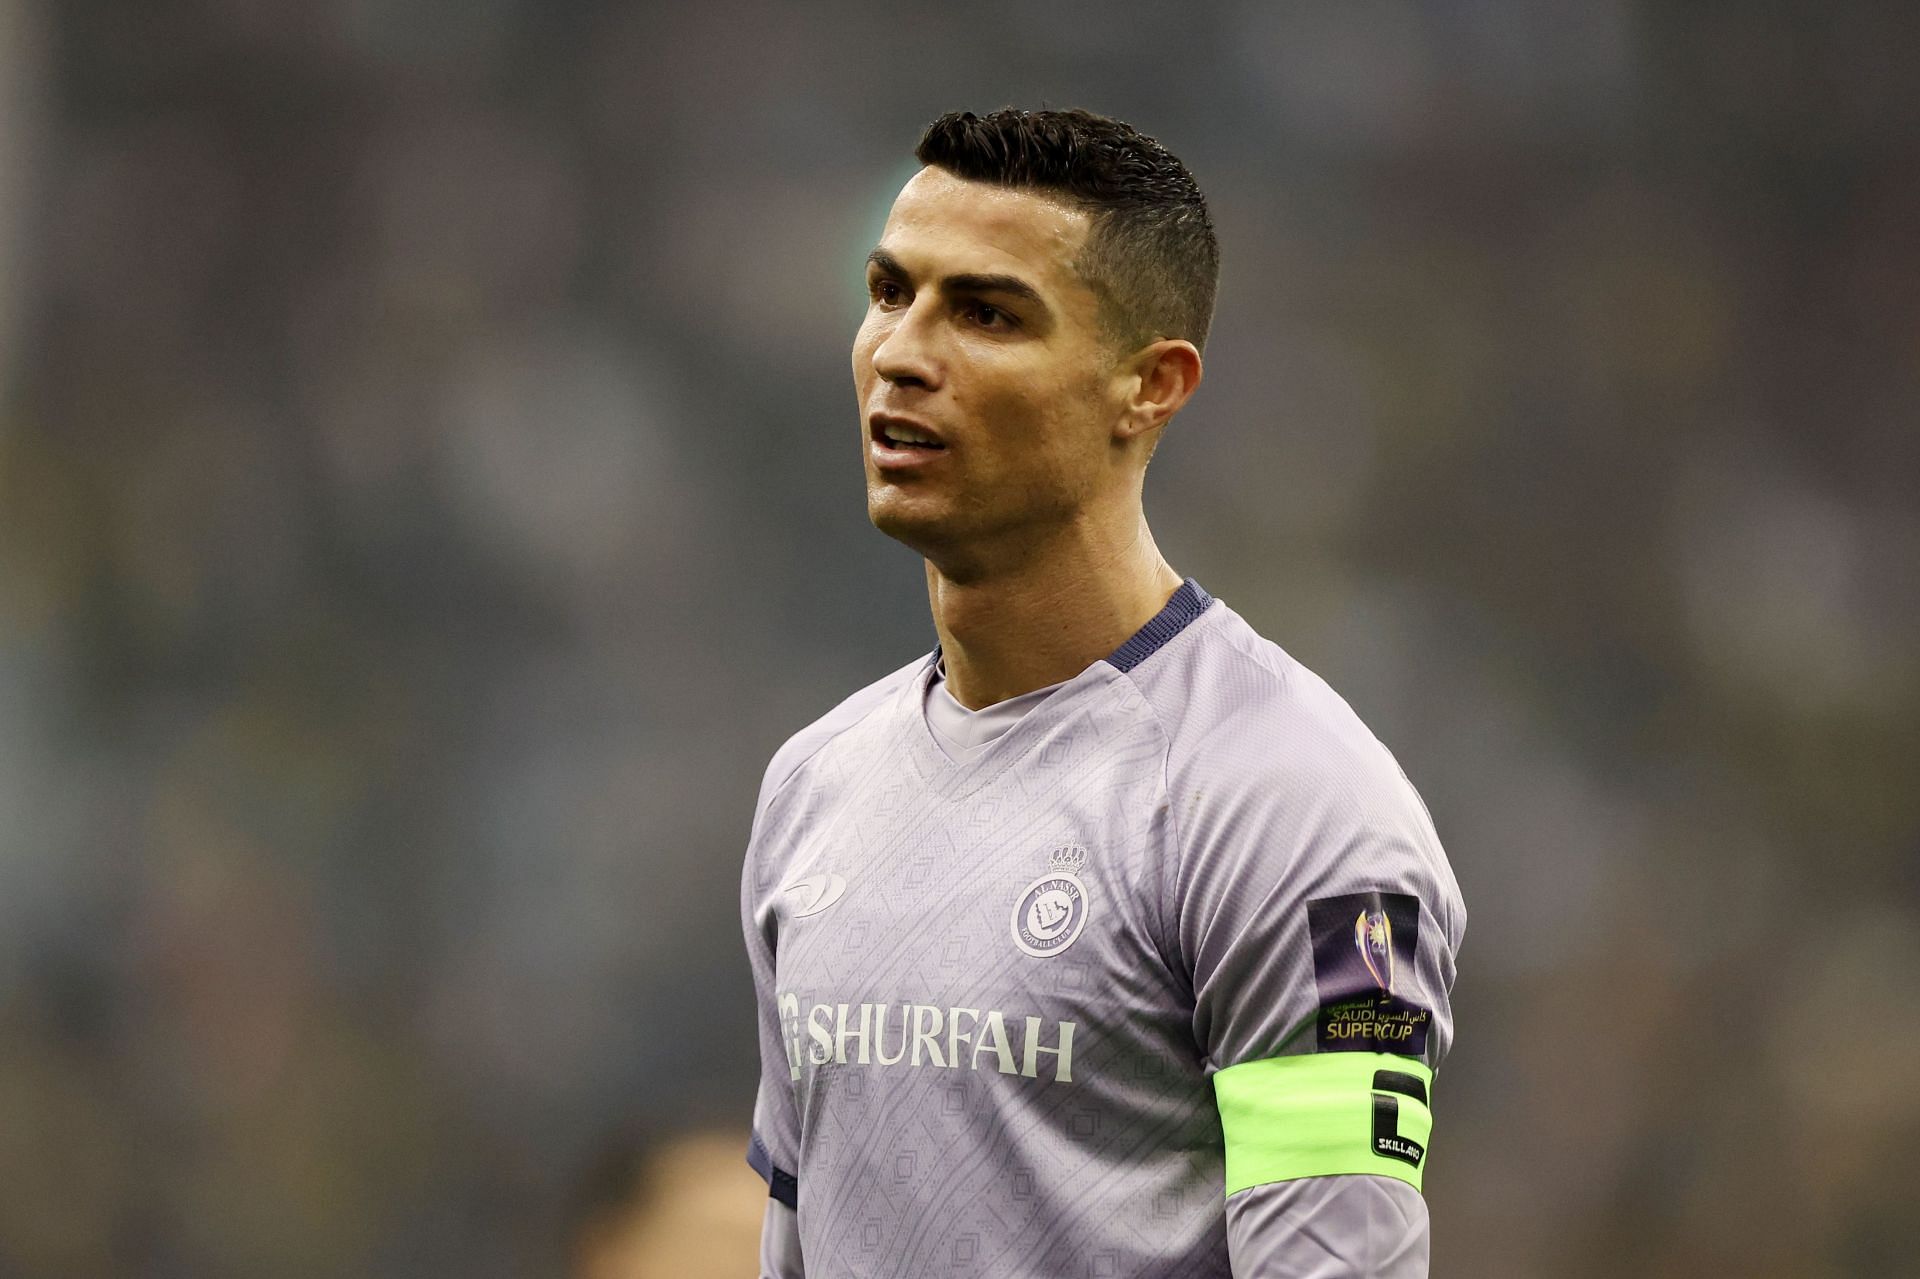 How Ronaldo Can Leave Al Nassr and Play Champions League Again